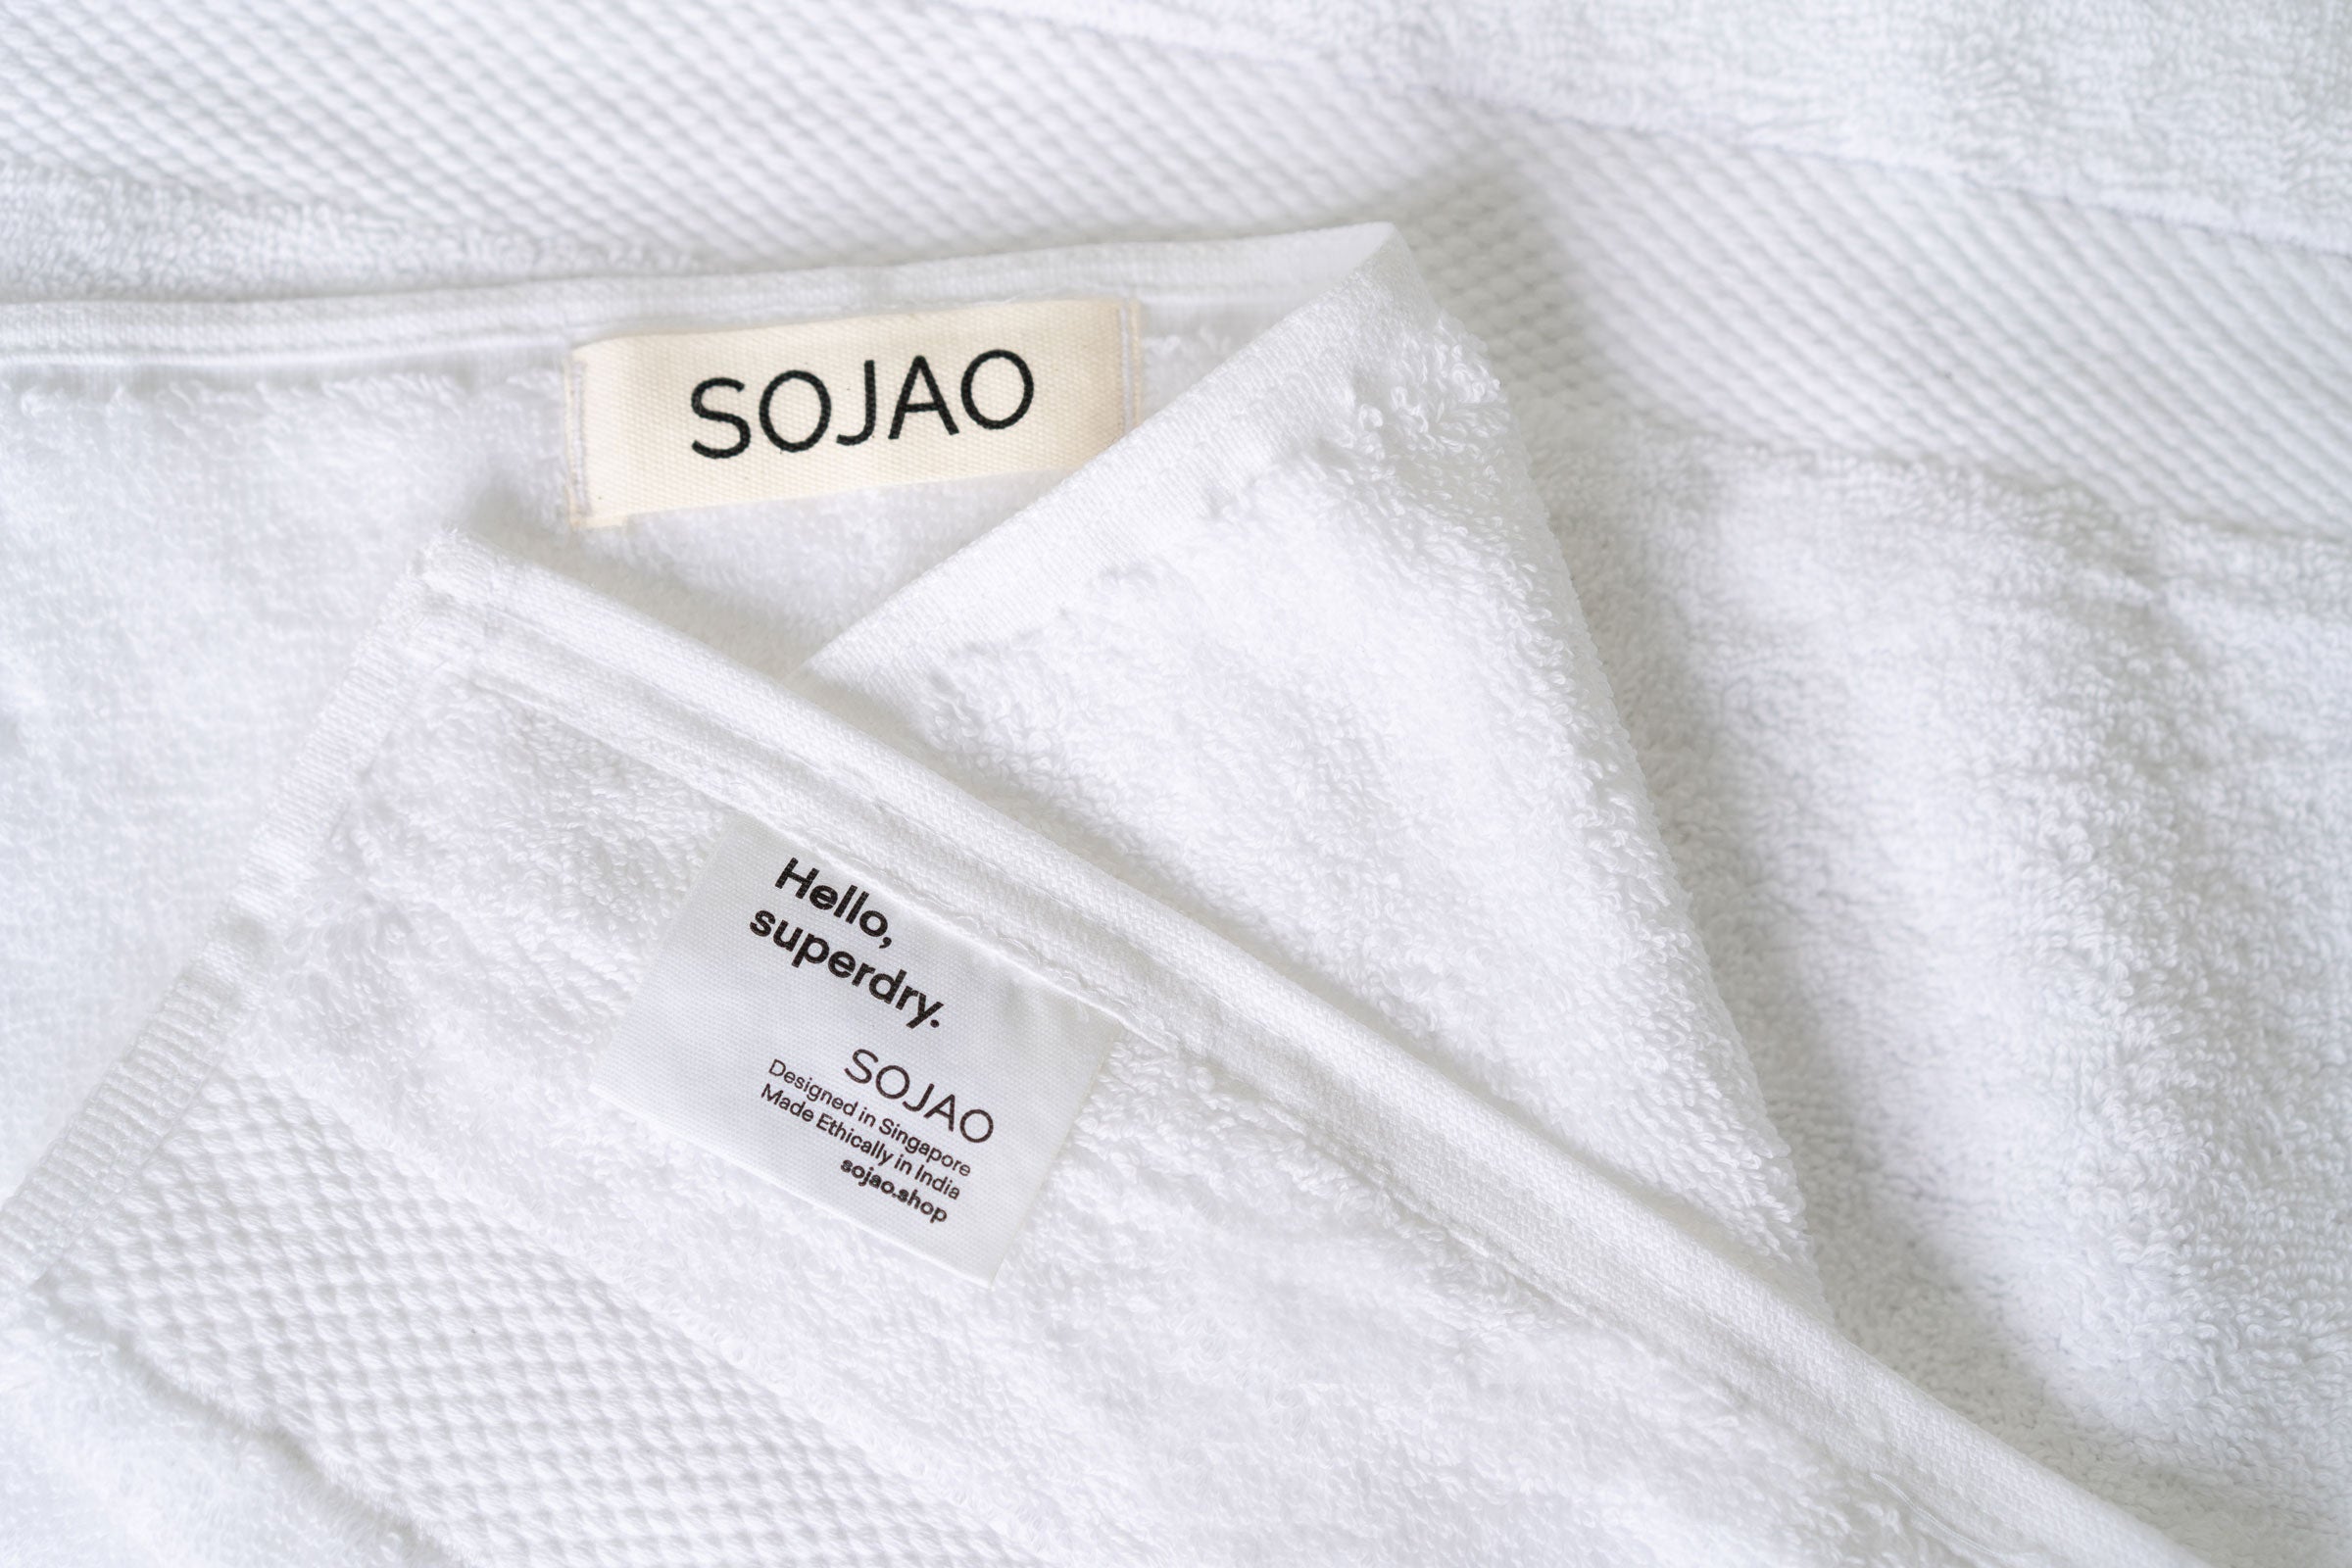 organic-cotton-bath-towel-in-white-colour-SOJAO-tag-by-sojao